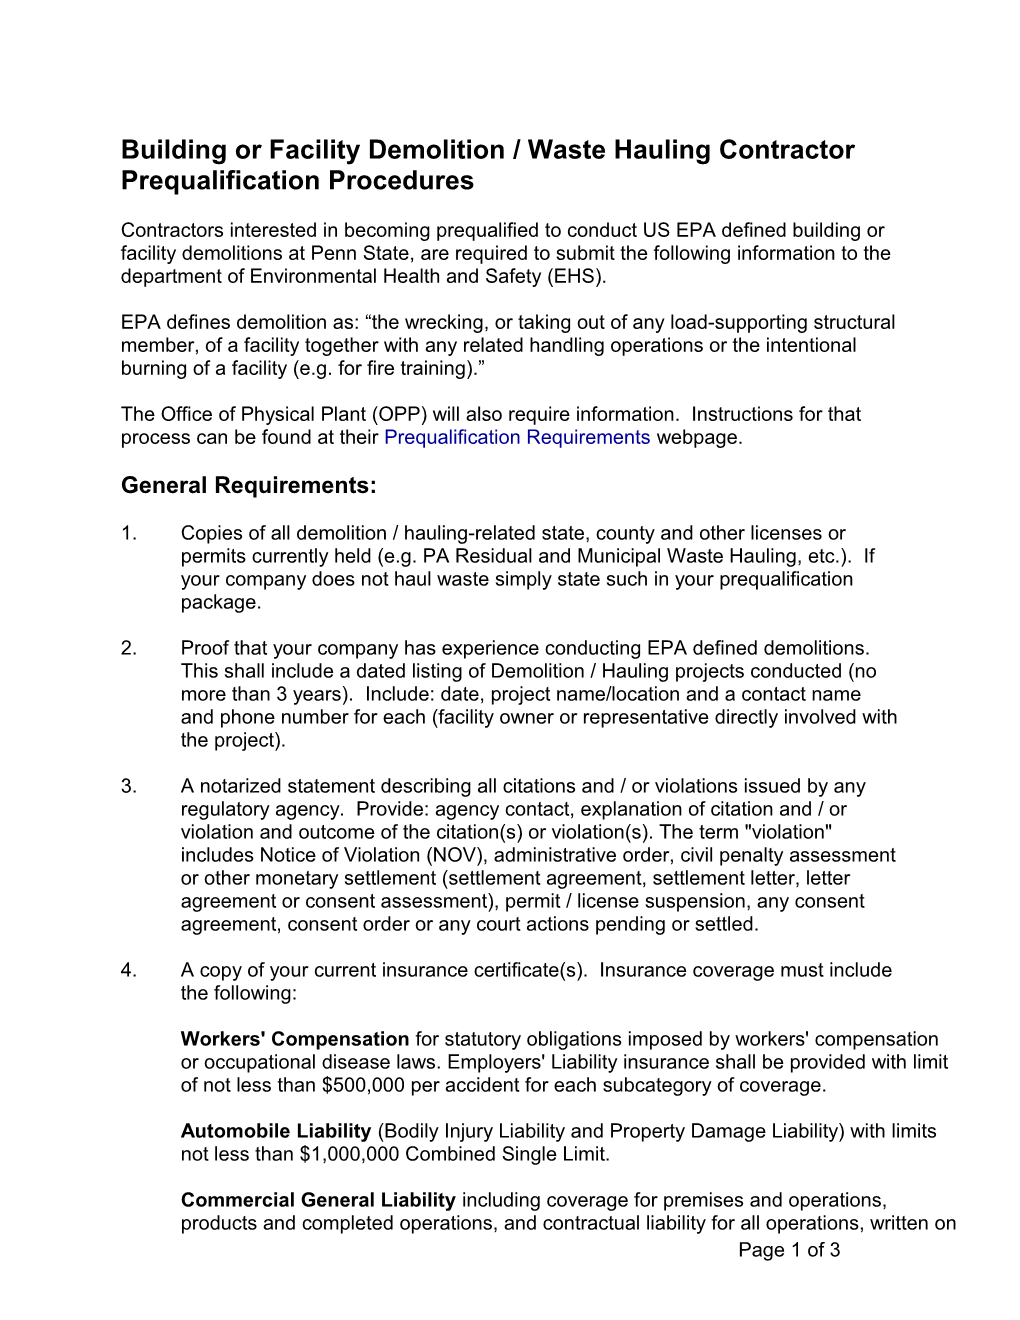 Requirements for Prequalification